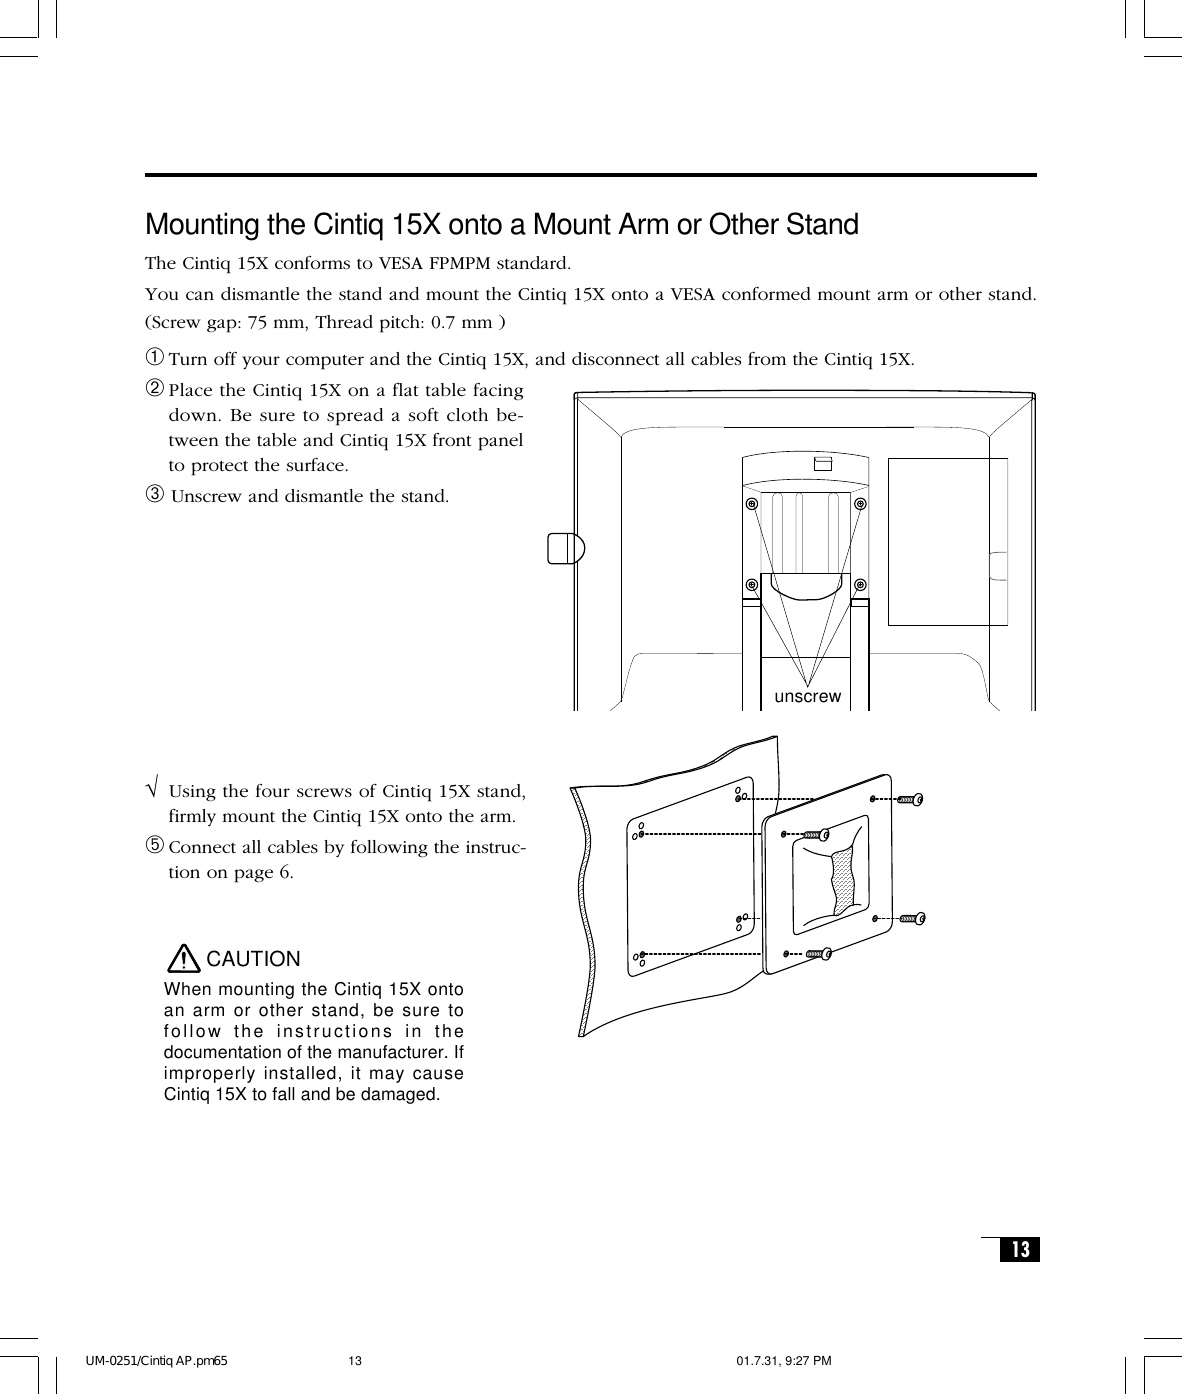 13CAUTIONWhen mounting the Cintiq 15X ontoan arm or other stand, be sure tofollow the instructions in thedocumentation of the manufacturer. Ifimproperly installed, it may causeCintiq 15X to fall and be damaged.Mounting the Cintiq 15X onto a Mount Arm or Other StandThe Cintiq 15X conforms to VESA FPMPM standard.You can dismantle the stand and mount the Cintiq 15X onto a VESA conformed mount arm or other stand.(Screw gap: 75 mm, Thread pitch: 0.7 mm )➀Turn off your computer and the Cintiq 15X, and disconnect all cables from the Cintiq 15X.➁Place the Cintiq 15X on a flat table facingdown. Be sure to spread a soft cloth be-tween the table and Cintiq 15X front panelto protect the surface.➂ Unscrew and dismantle the stand.√Using the four screws of Cintiq 15X stand,firmly mount the Cintiq 15X onto the arm.➄Connect all cables by following the instruc-tion on page 6.unscrewUM-0251/Cintiq AP.pm65 01.7.31, 9:27 PM13